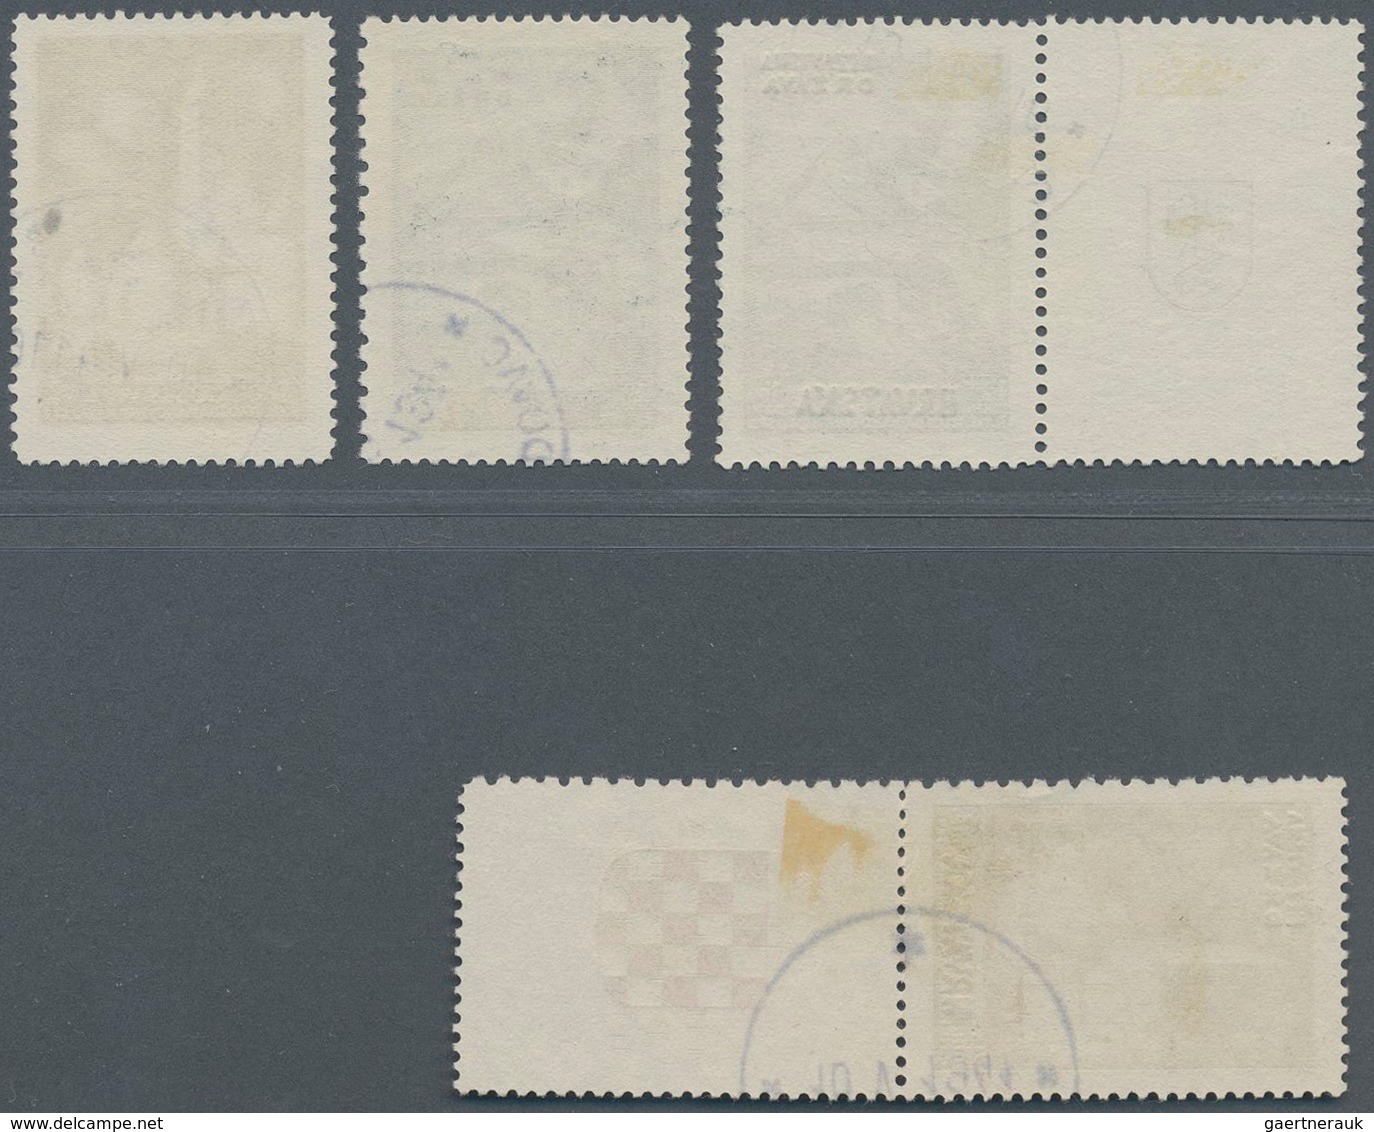 Kroatien: 1941, 1.50 Din. + 1.50 Din. And 4 Din. + 3 Din. Exhibition Stamps With Gold Imprint. Here - Croatia